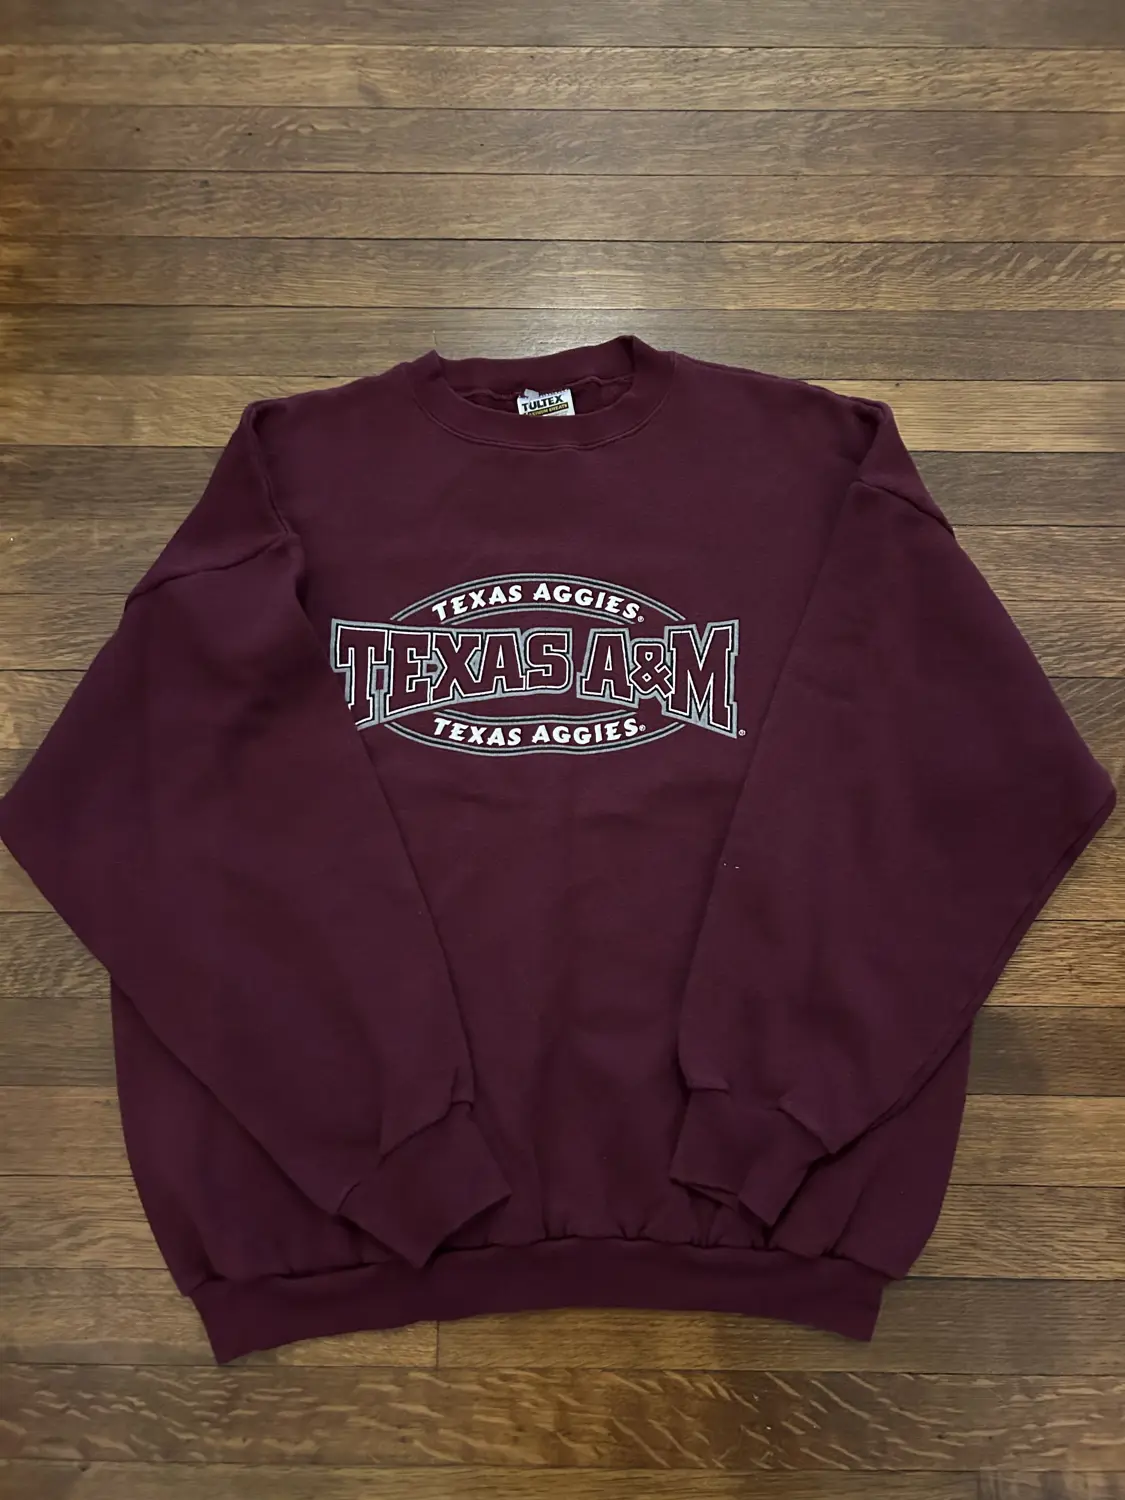 Vintage Texas A&M Sweater